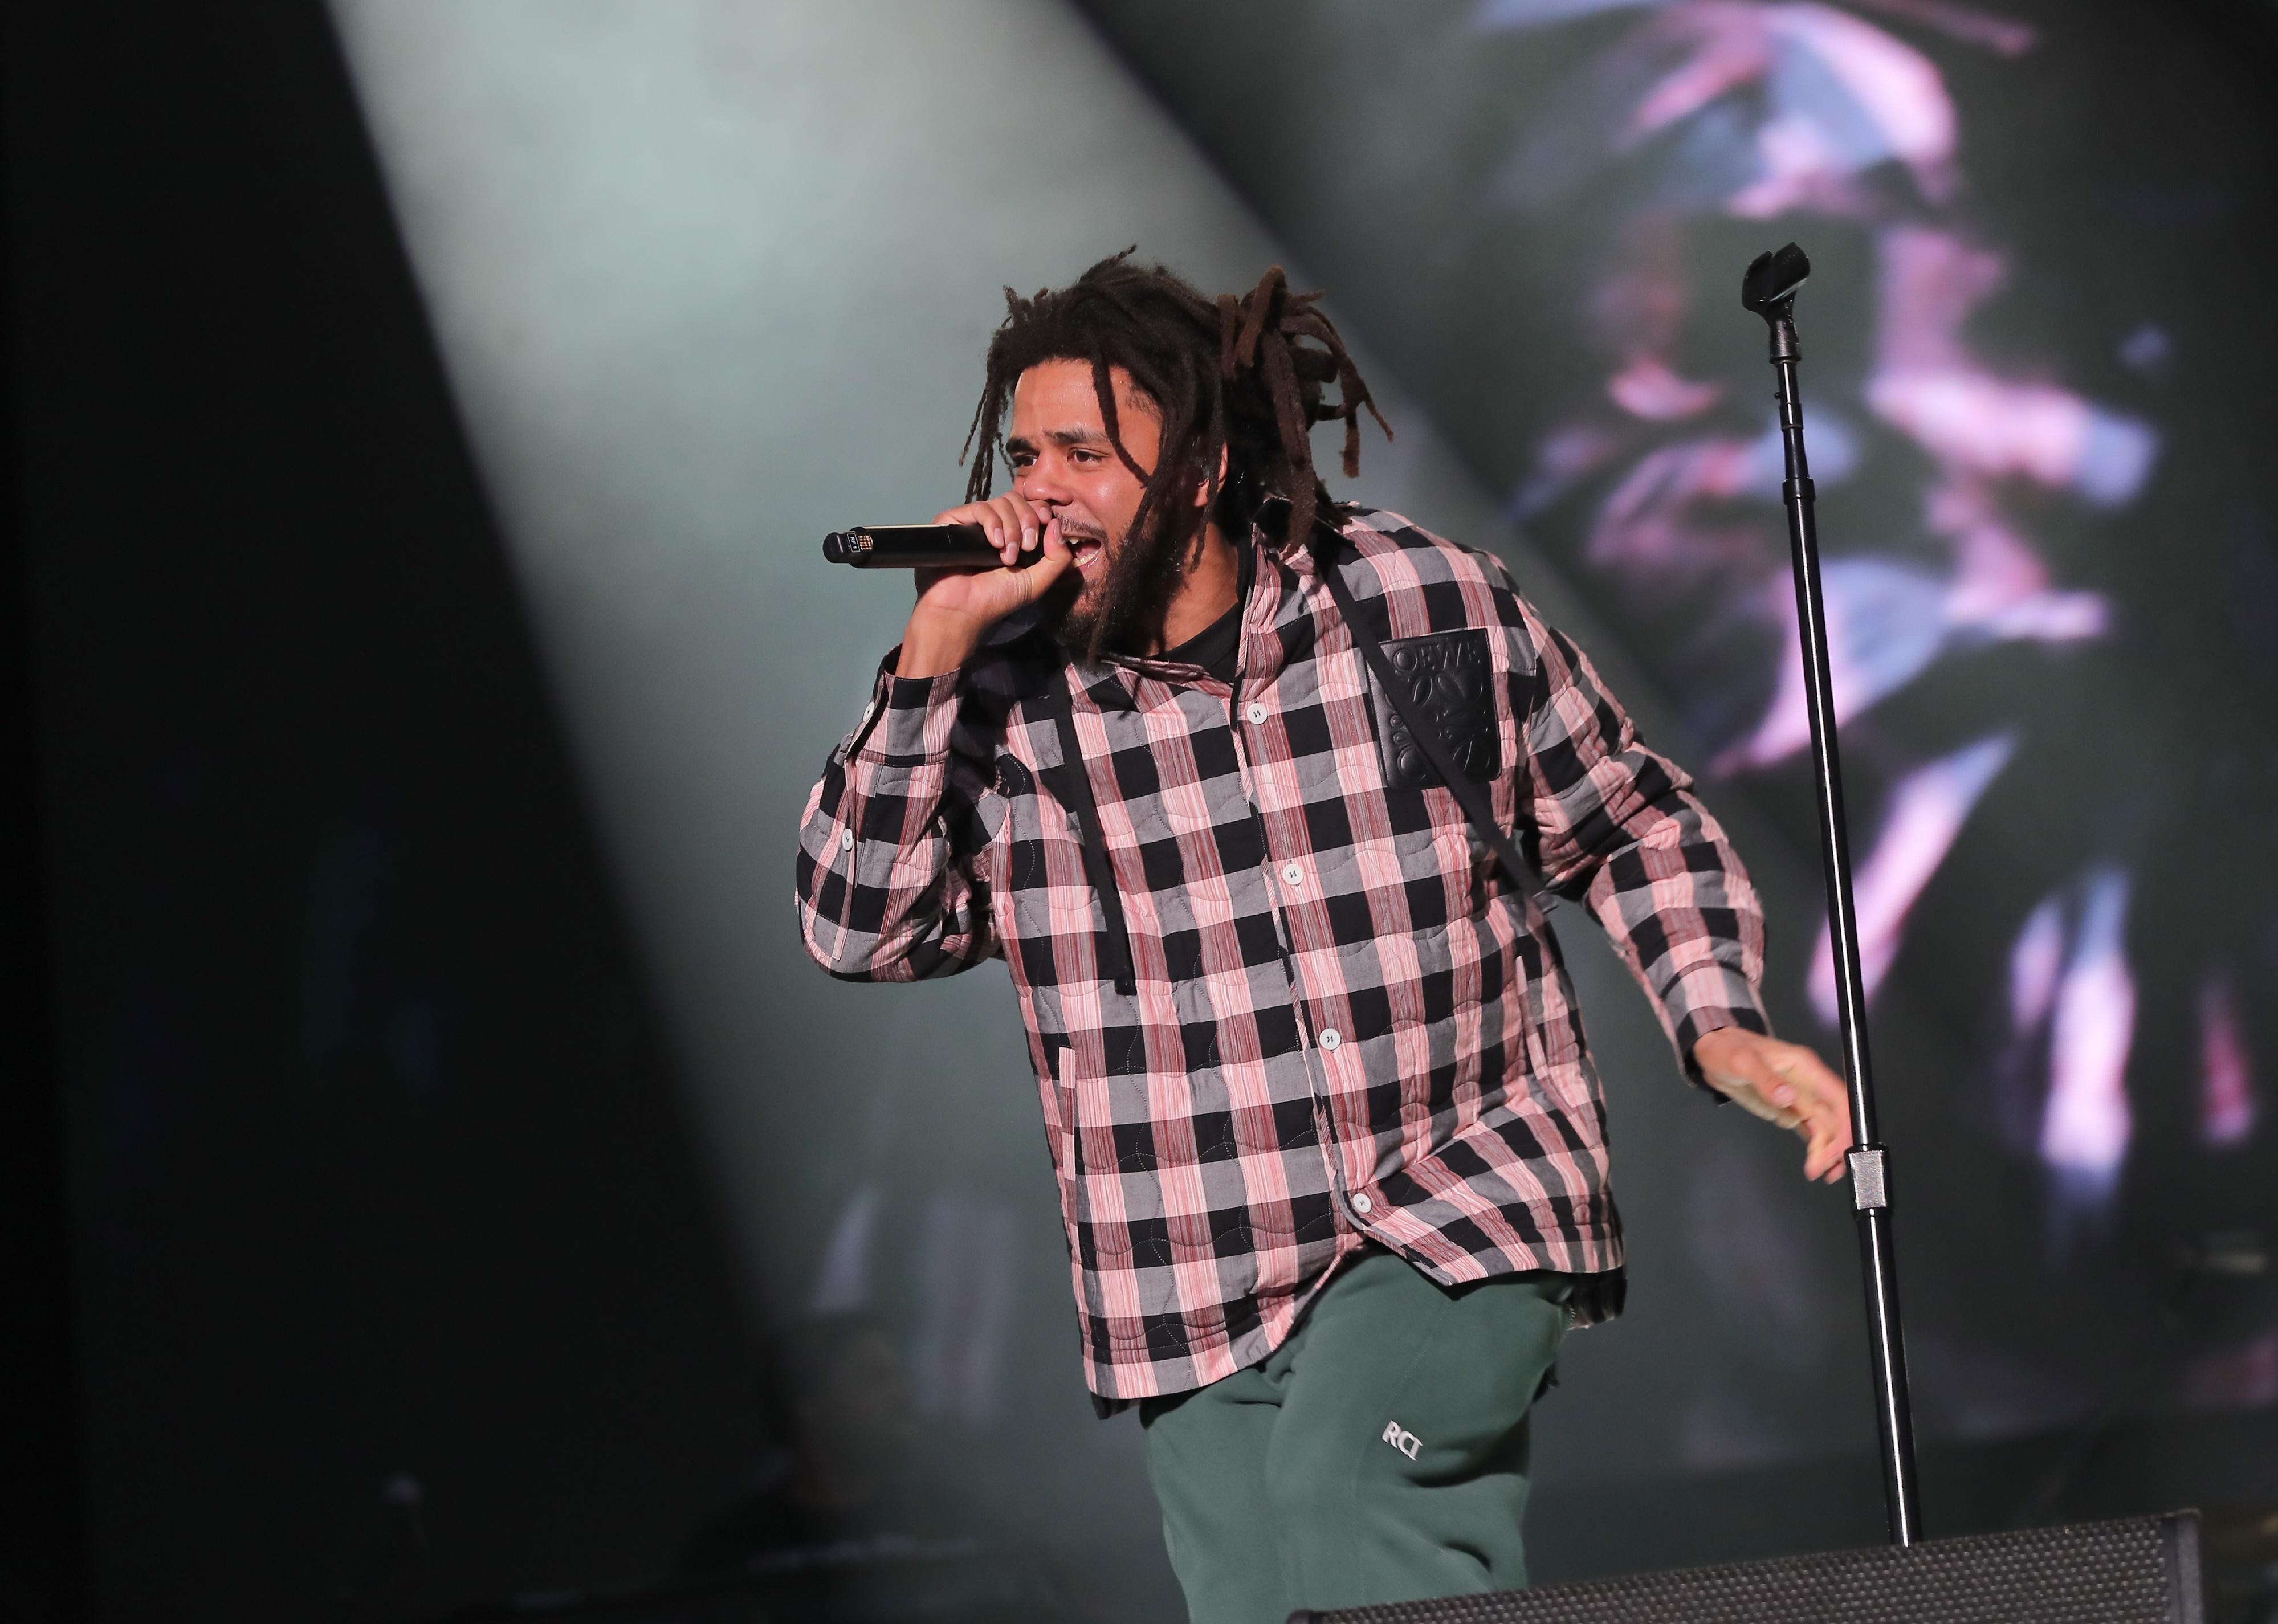 J. Cole performing onstage in a pink and black checkered shirt.